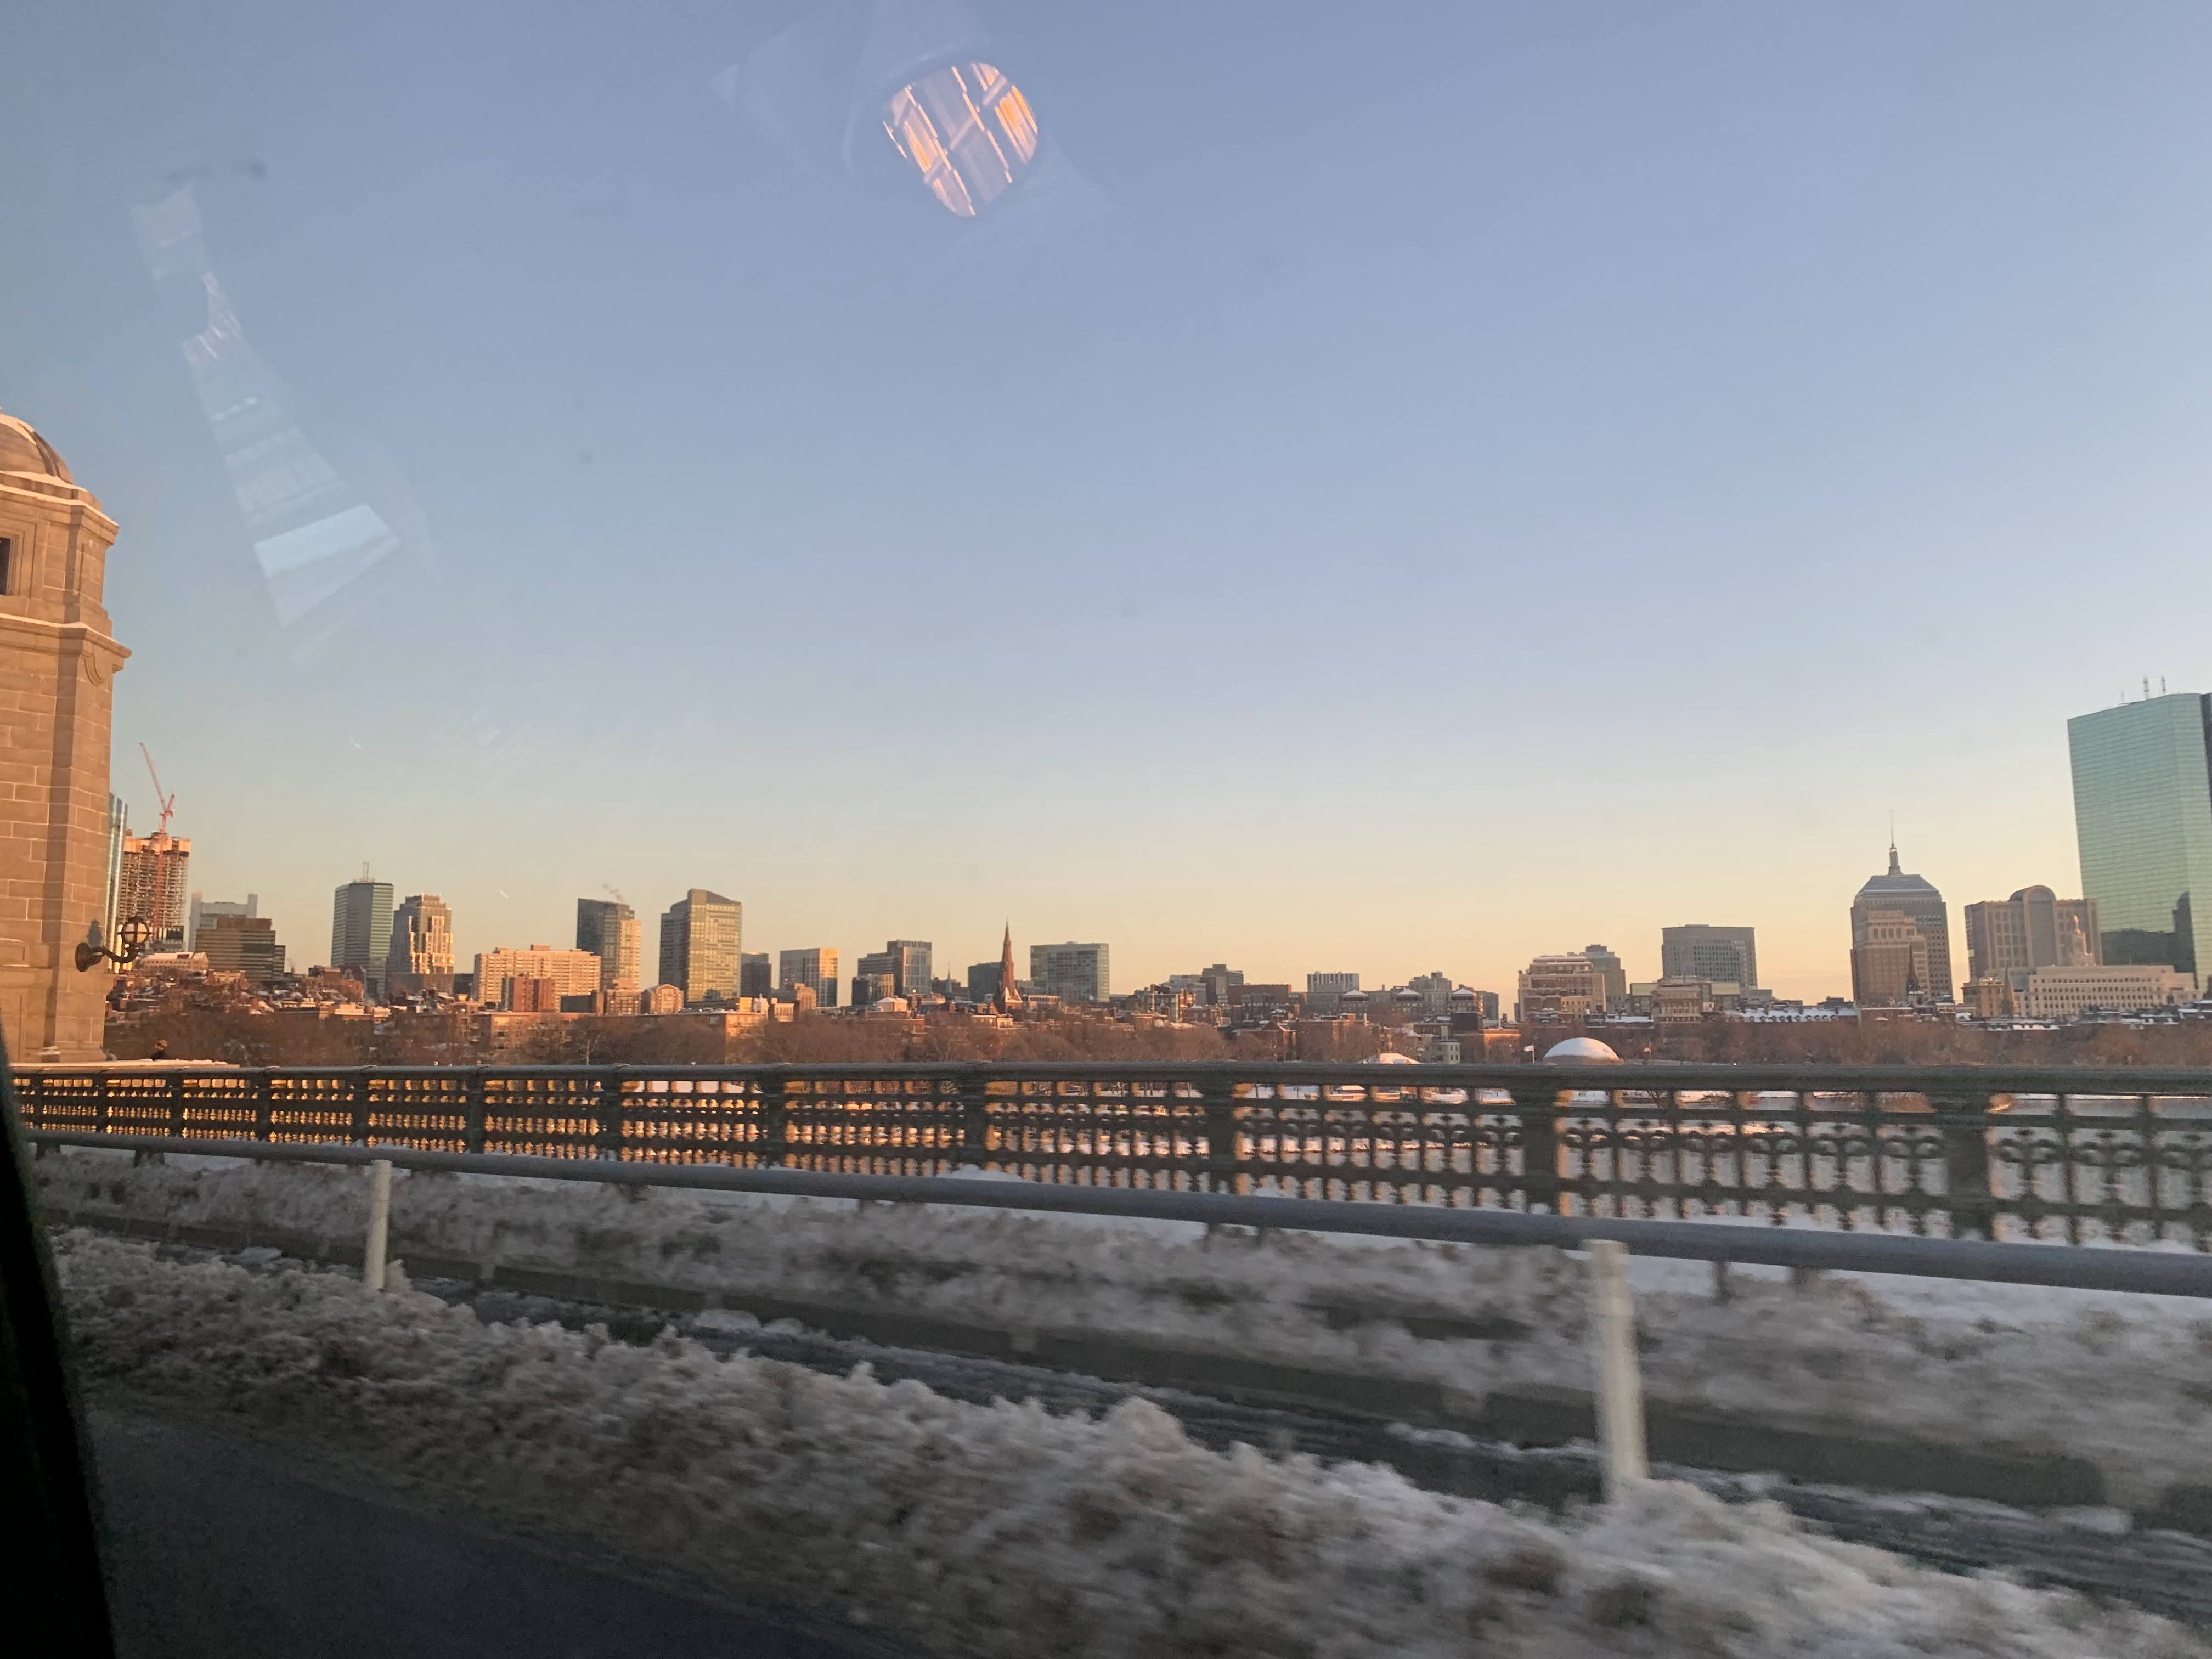 The Charles basked in orange glow on a leftover snowy day.